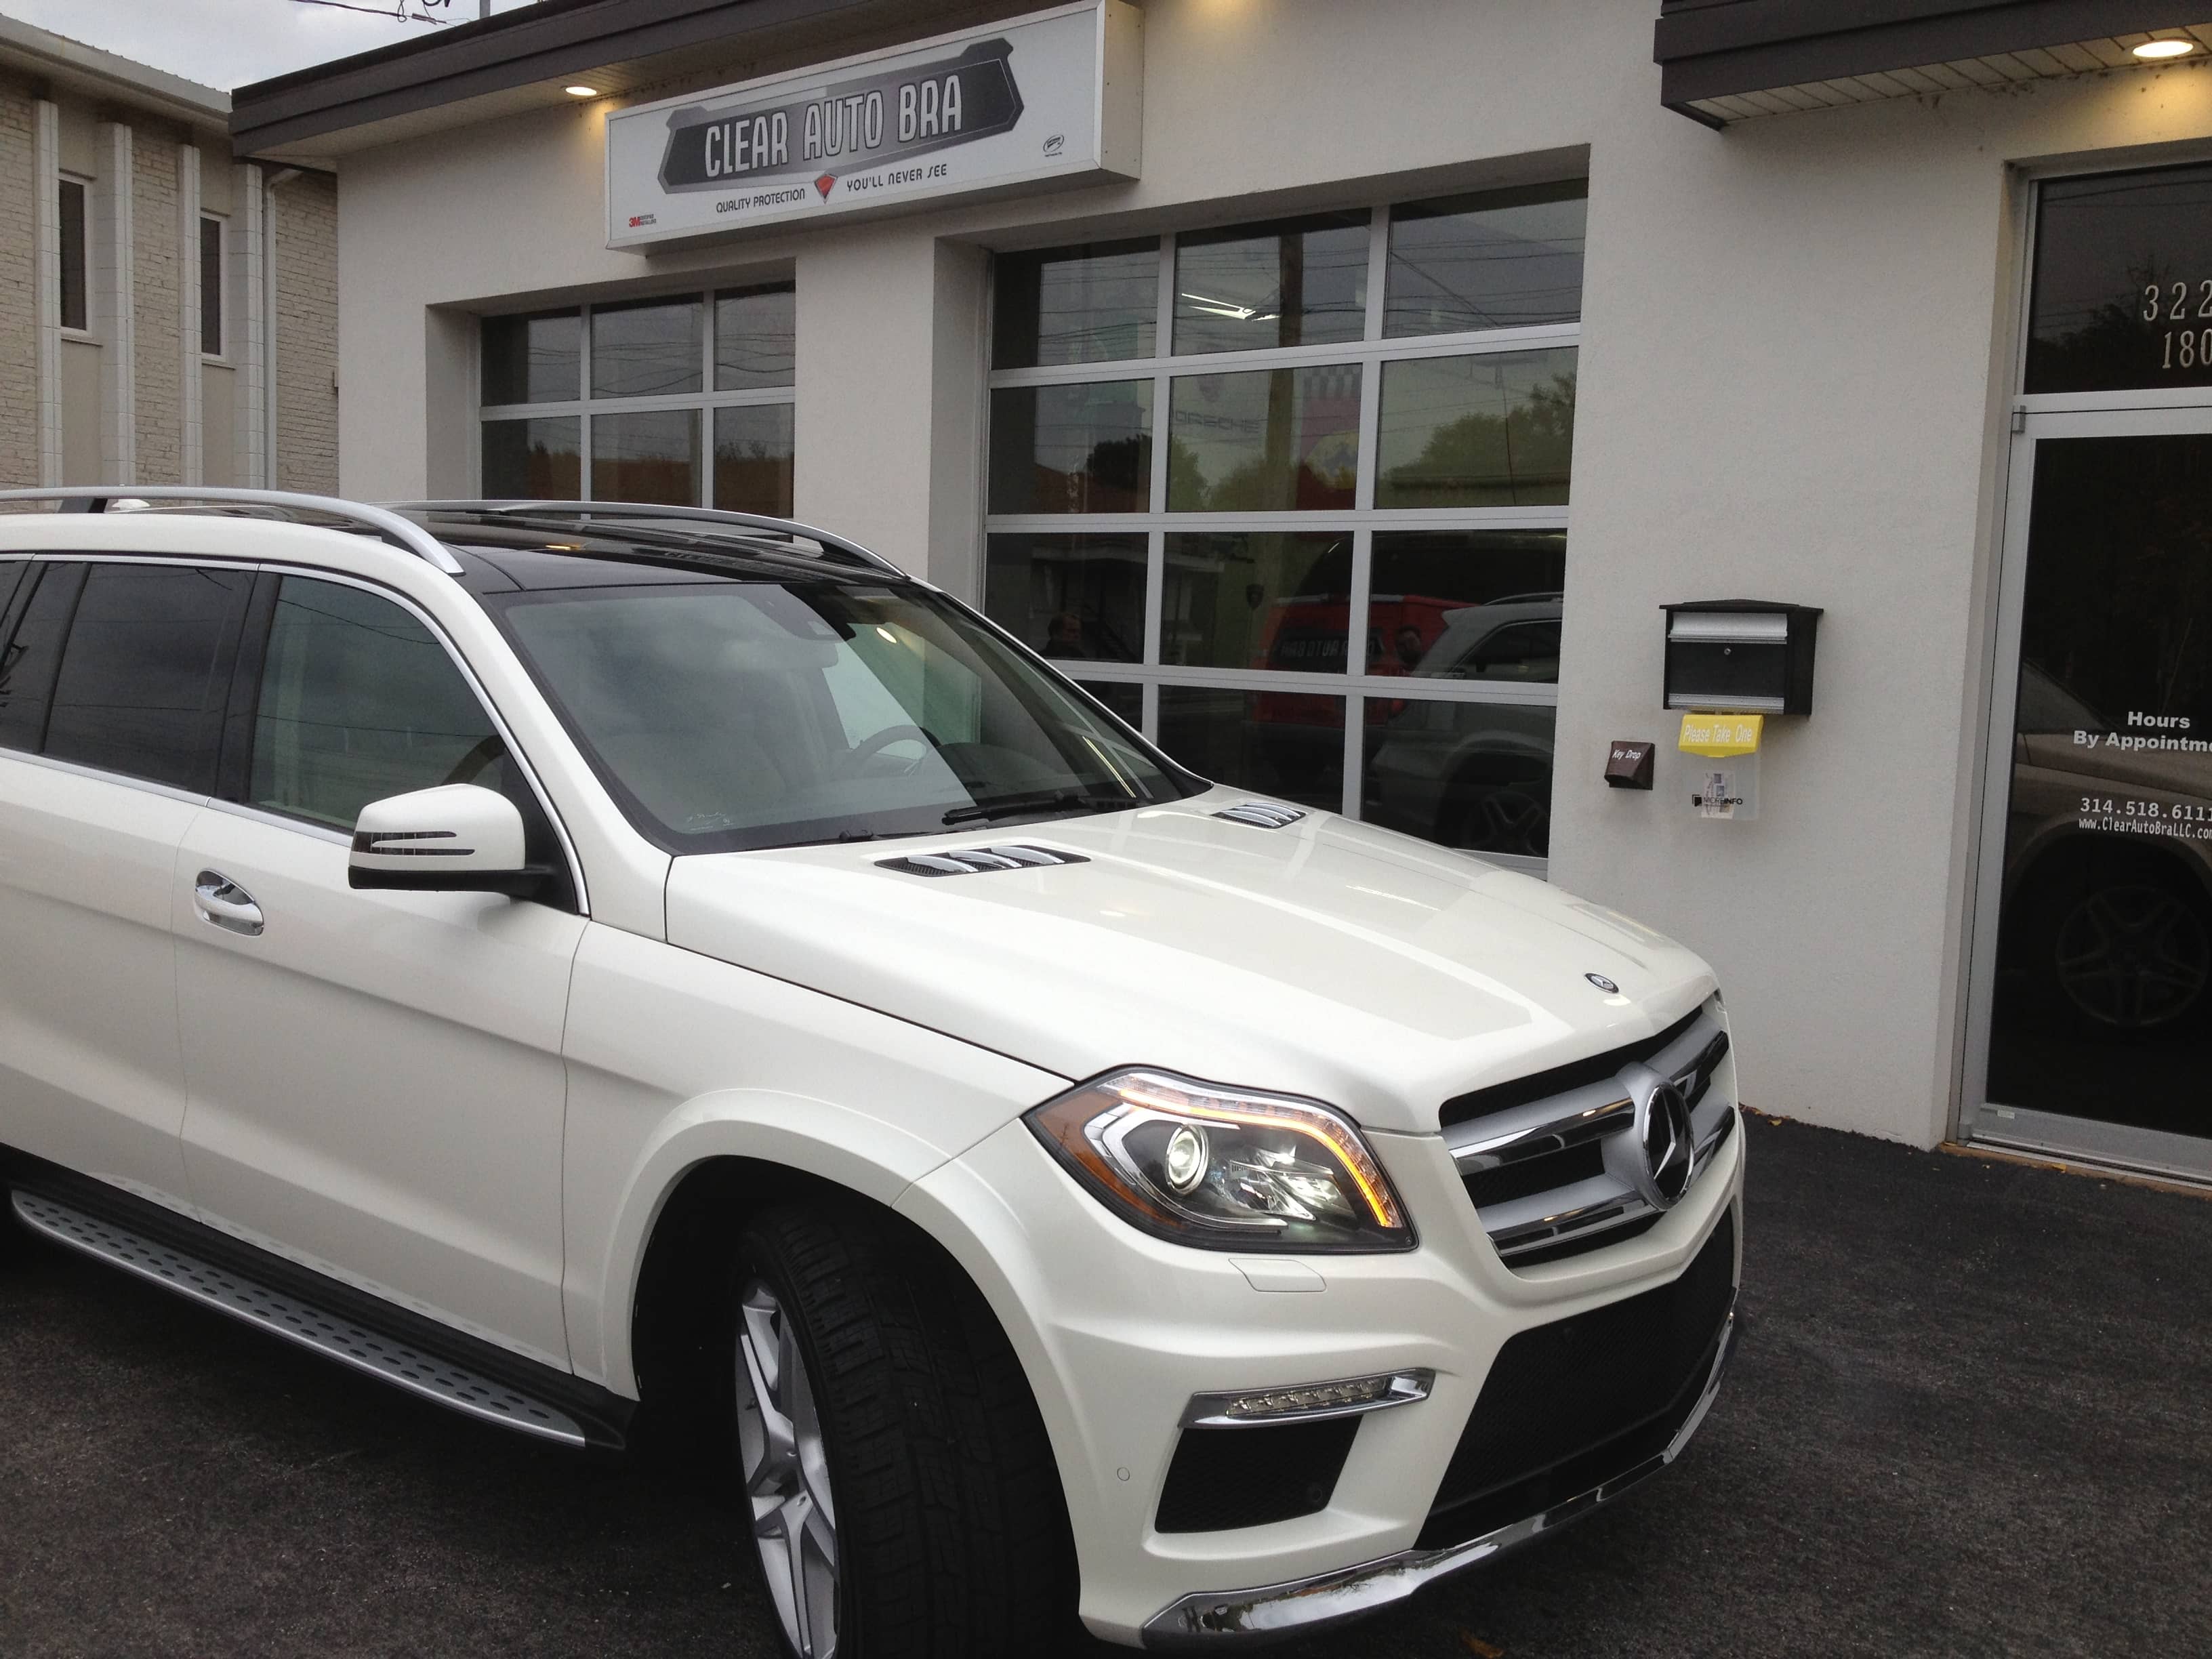 2013 Mercedes GL550 and 2013 Mercedes CLS550 invisible shield St. Louis paint protection film